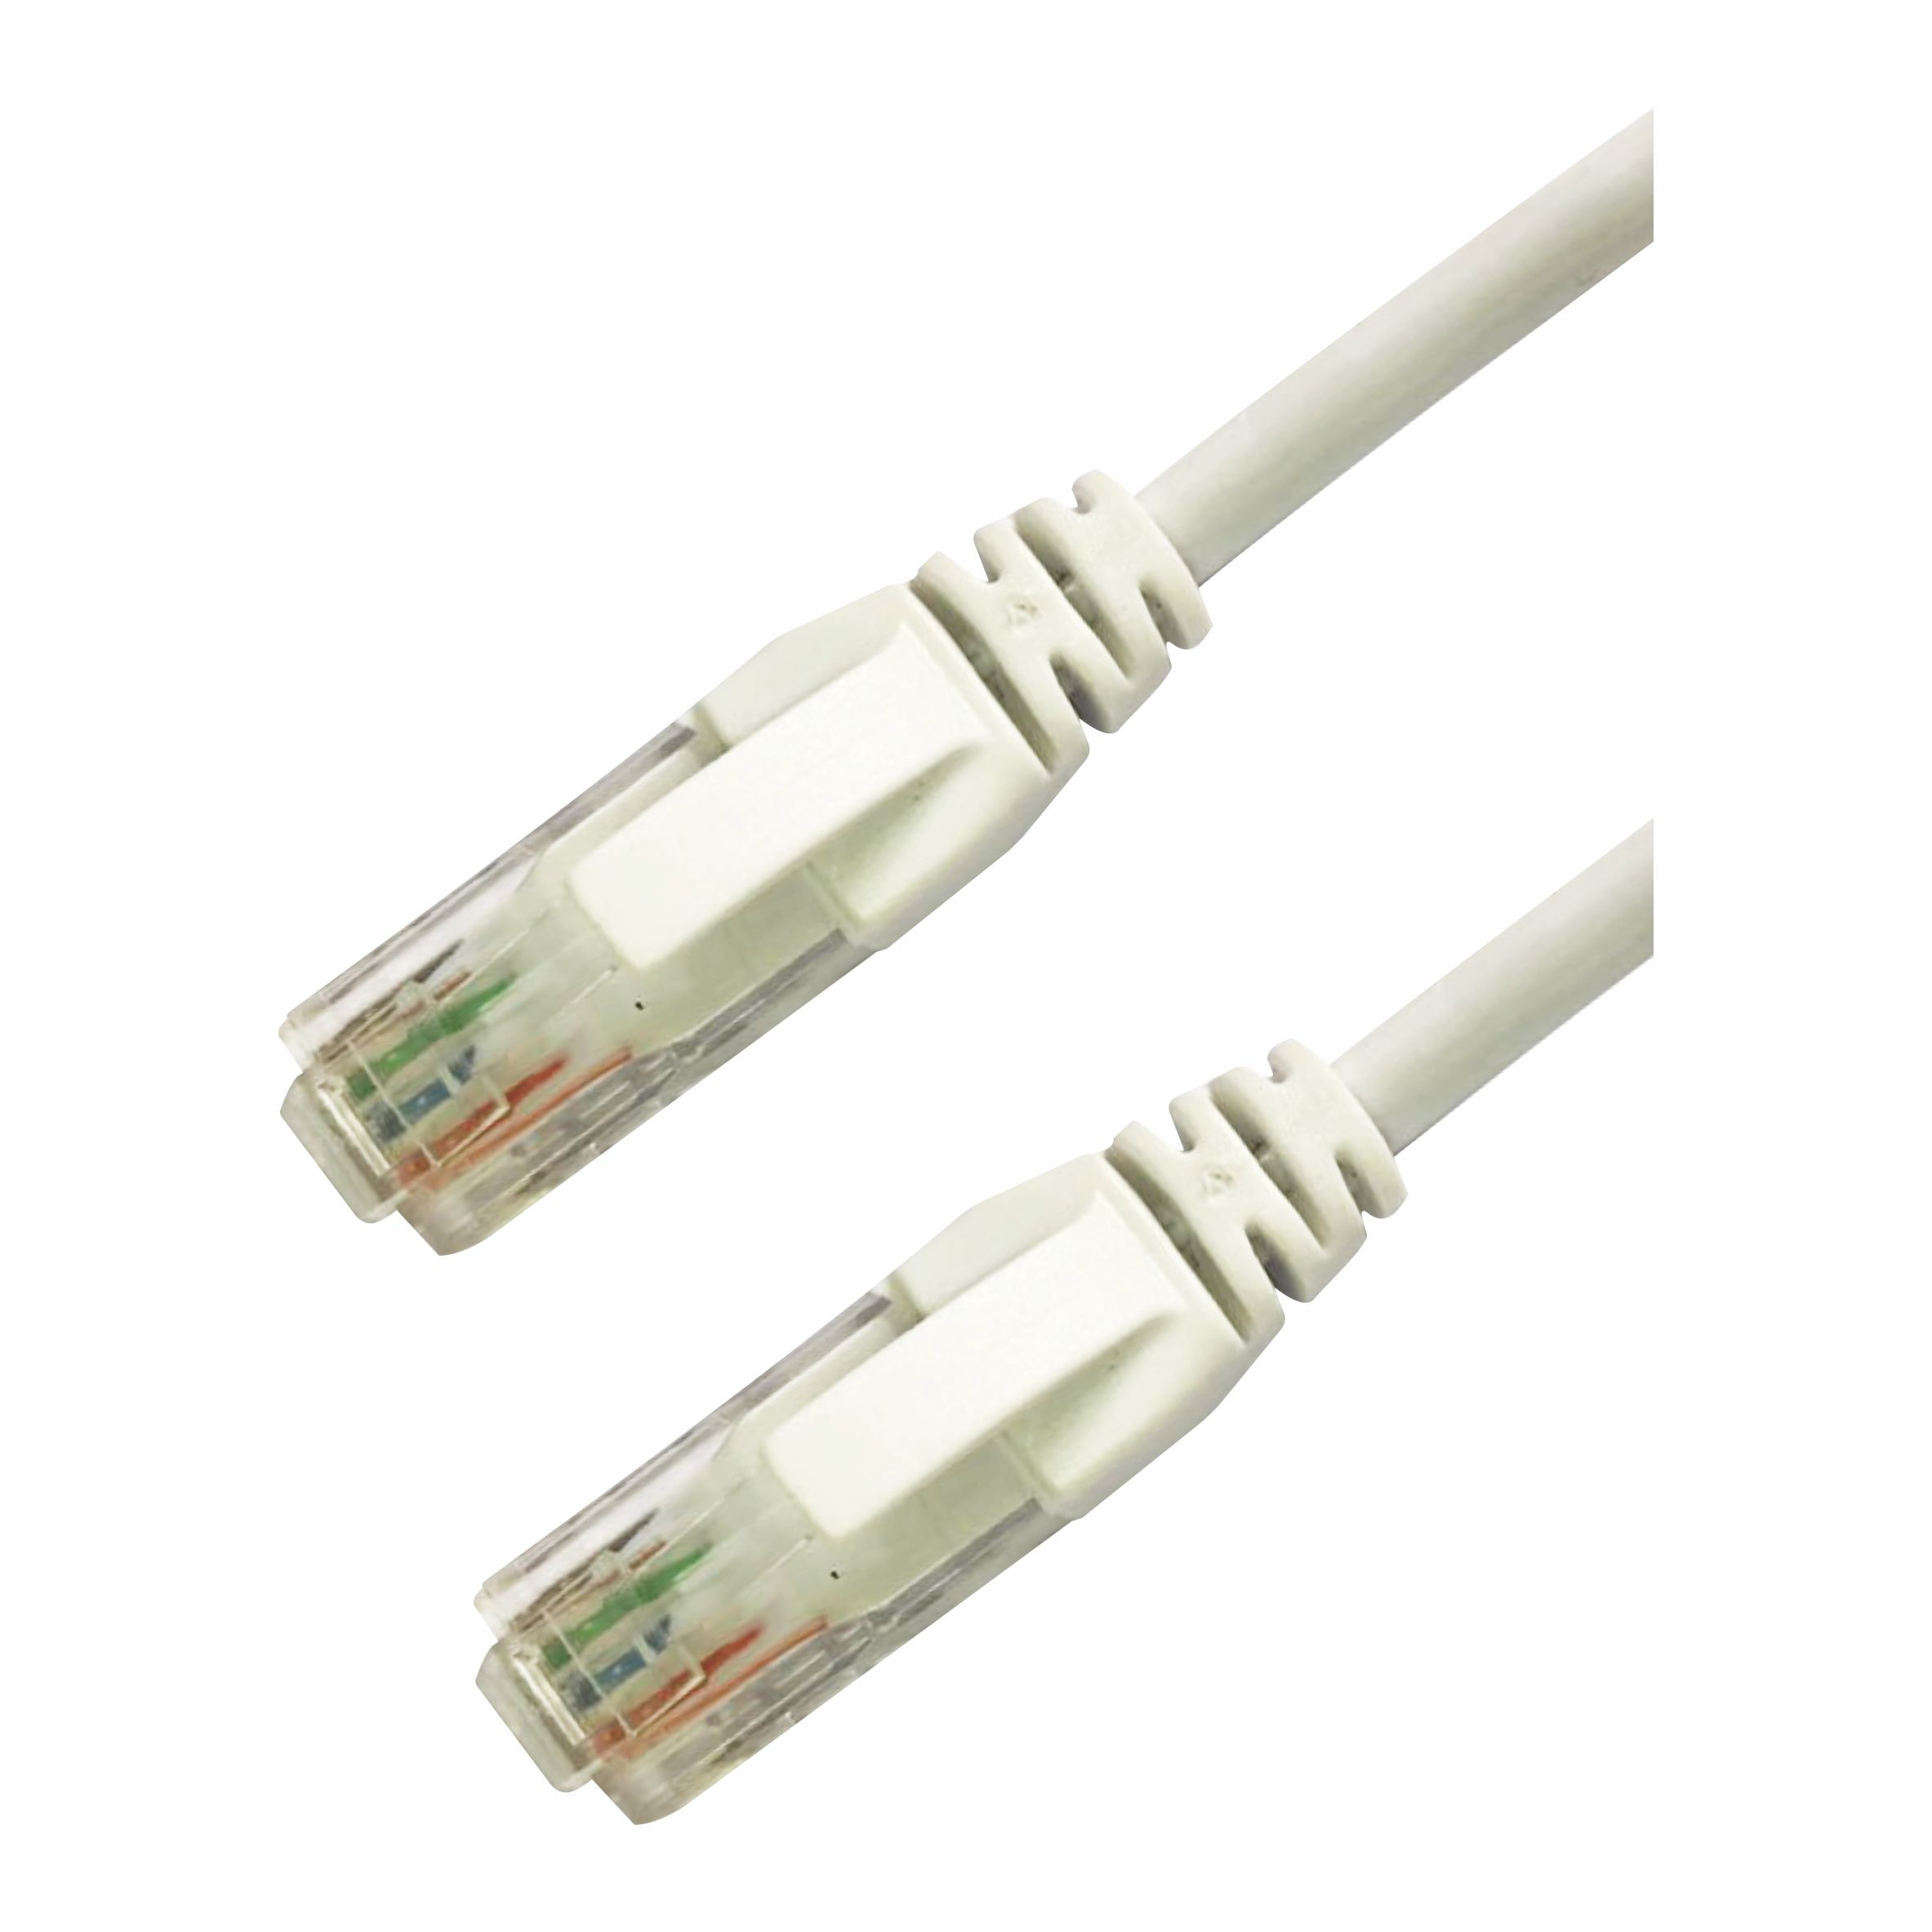 PARROT PRODUCTS Network Cable (Cat 6 - 2 Meters)